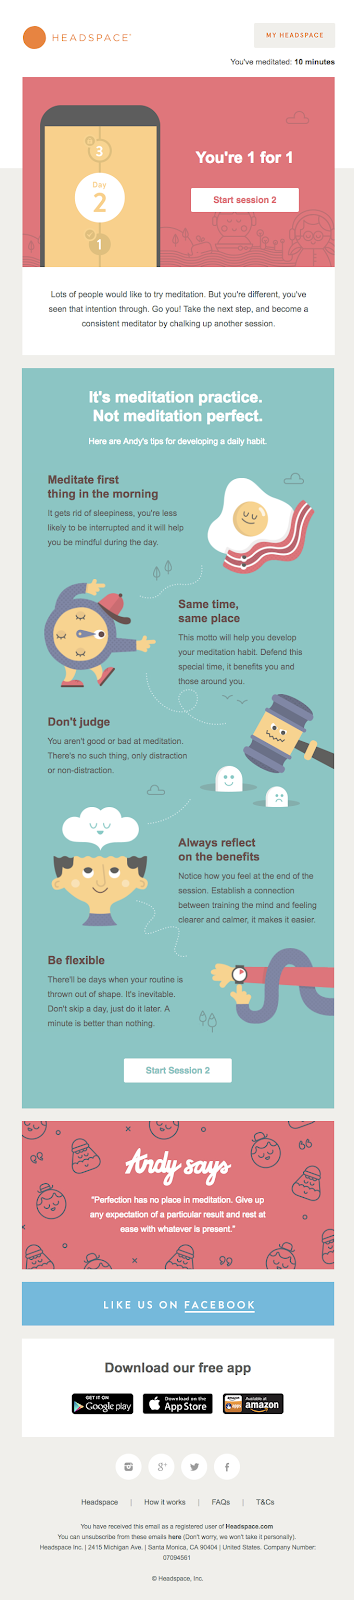 Headspace onboarding email